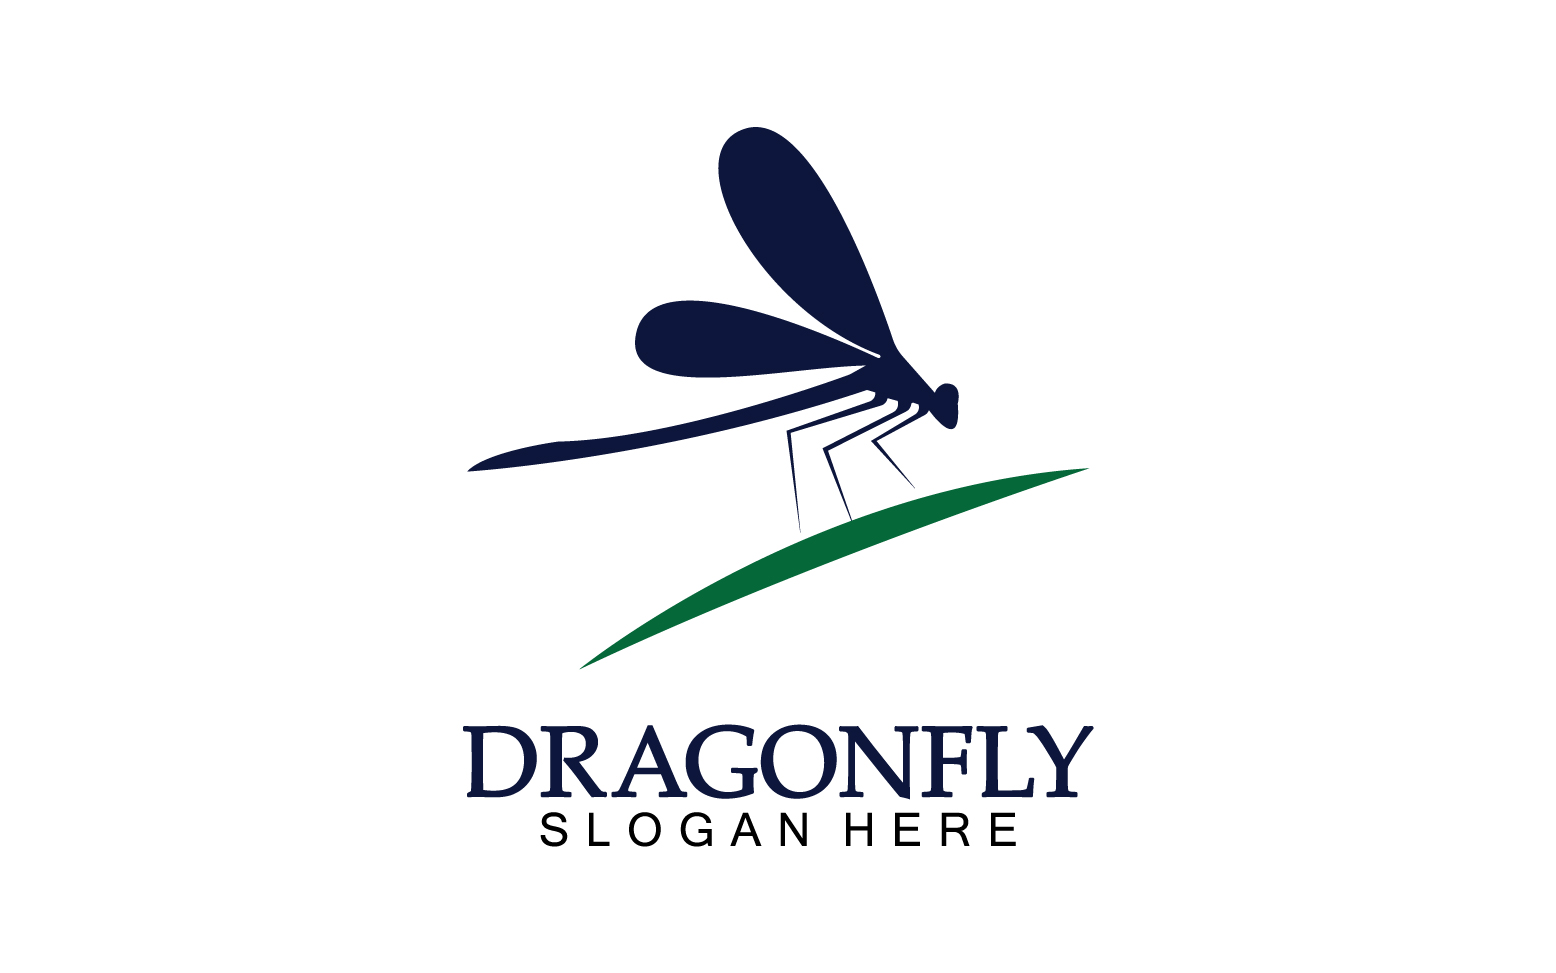 Dragonfly silhouette icon flat vector illustration logo clipart v9